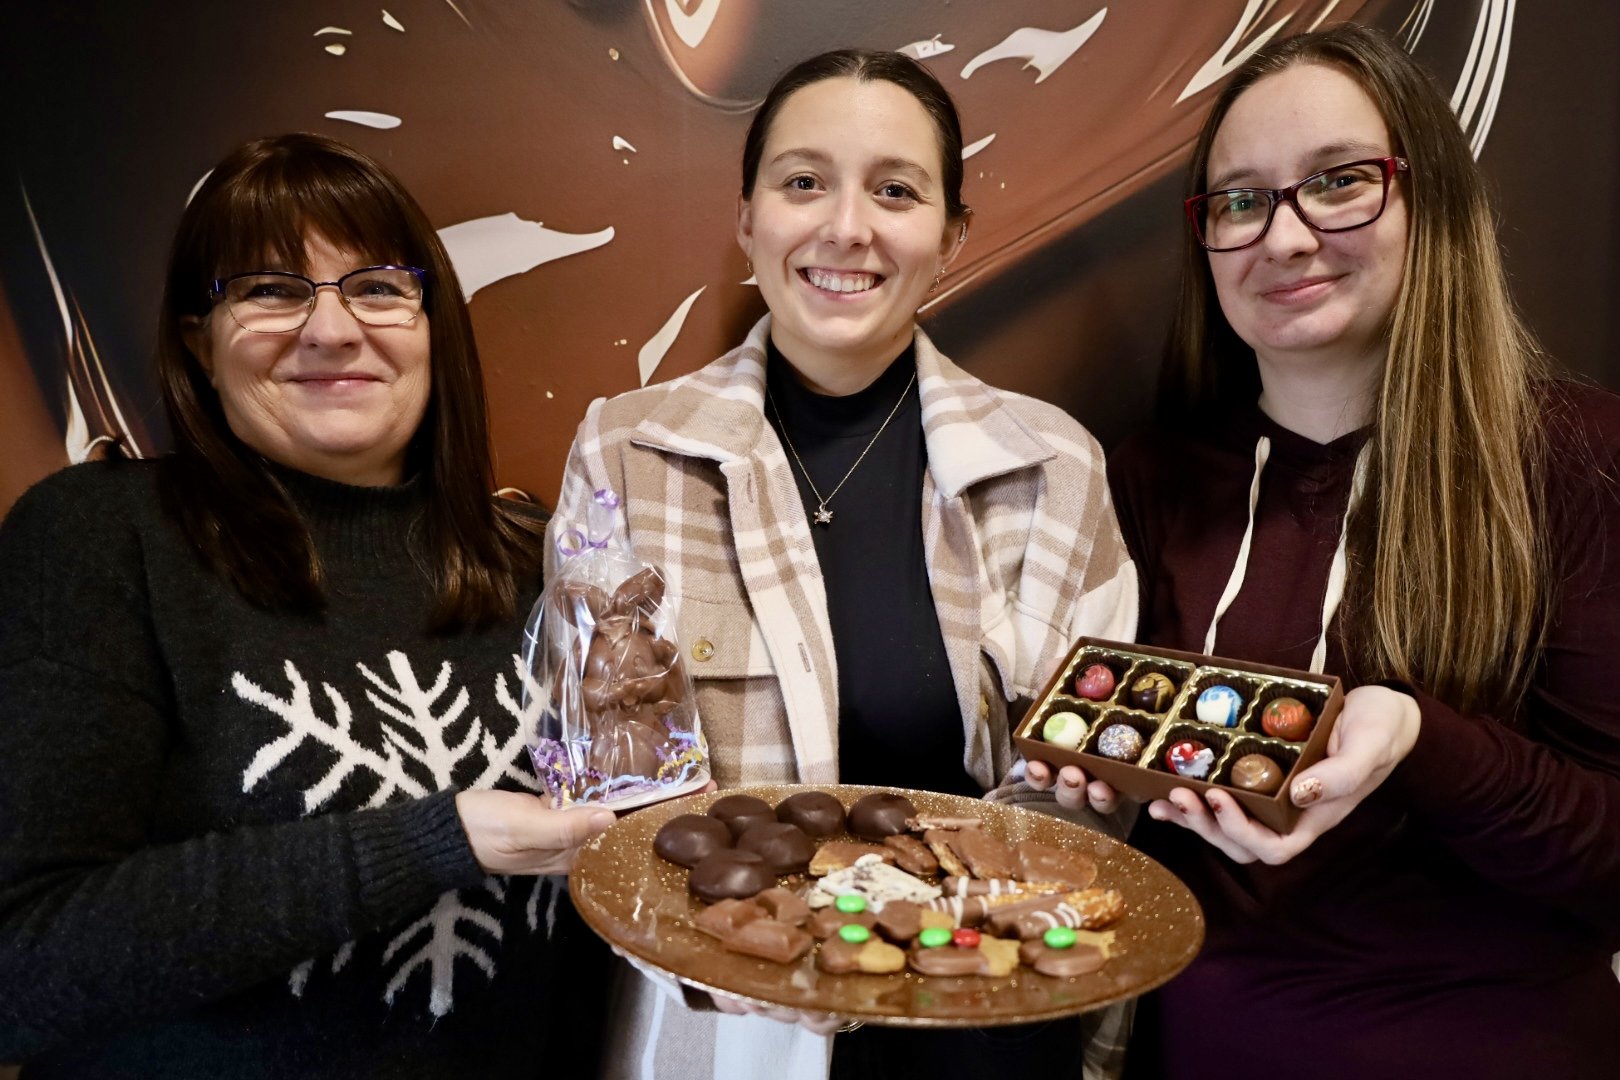 Elaine Webster (left), Kristine Webster (middle) and Nichol Wagenblast (right) showcasing some of the chocolatier's featured items. All photos by David Tuan Bui.